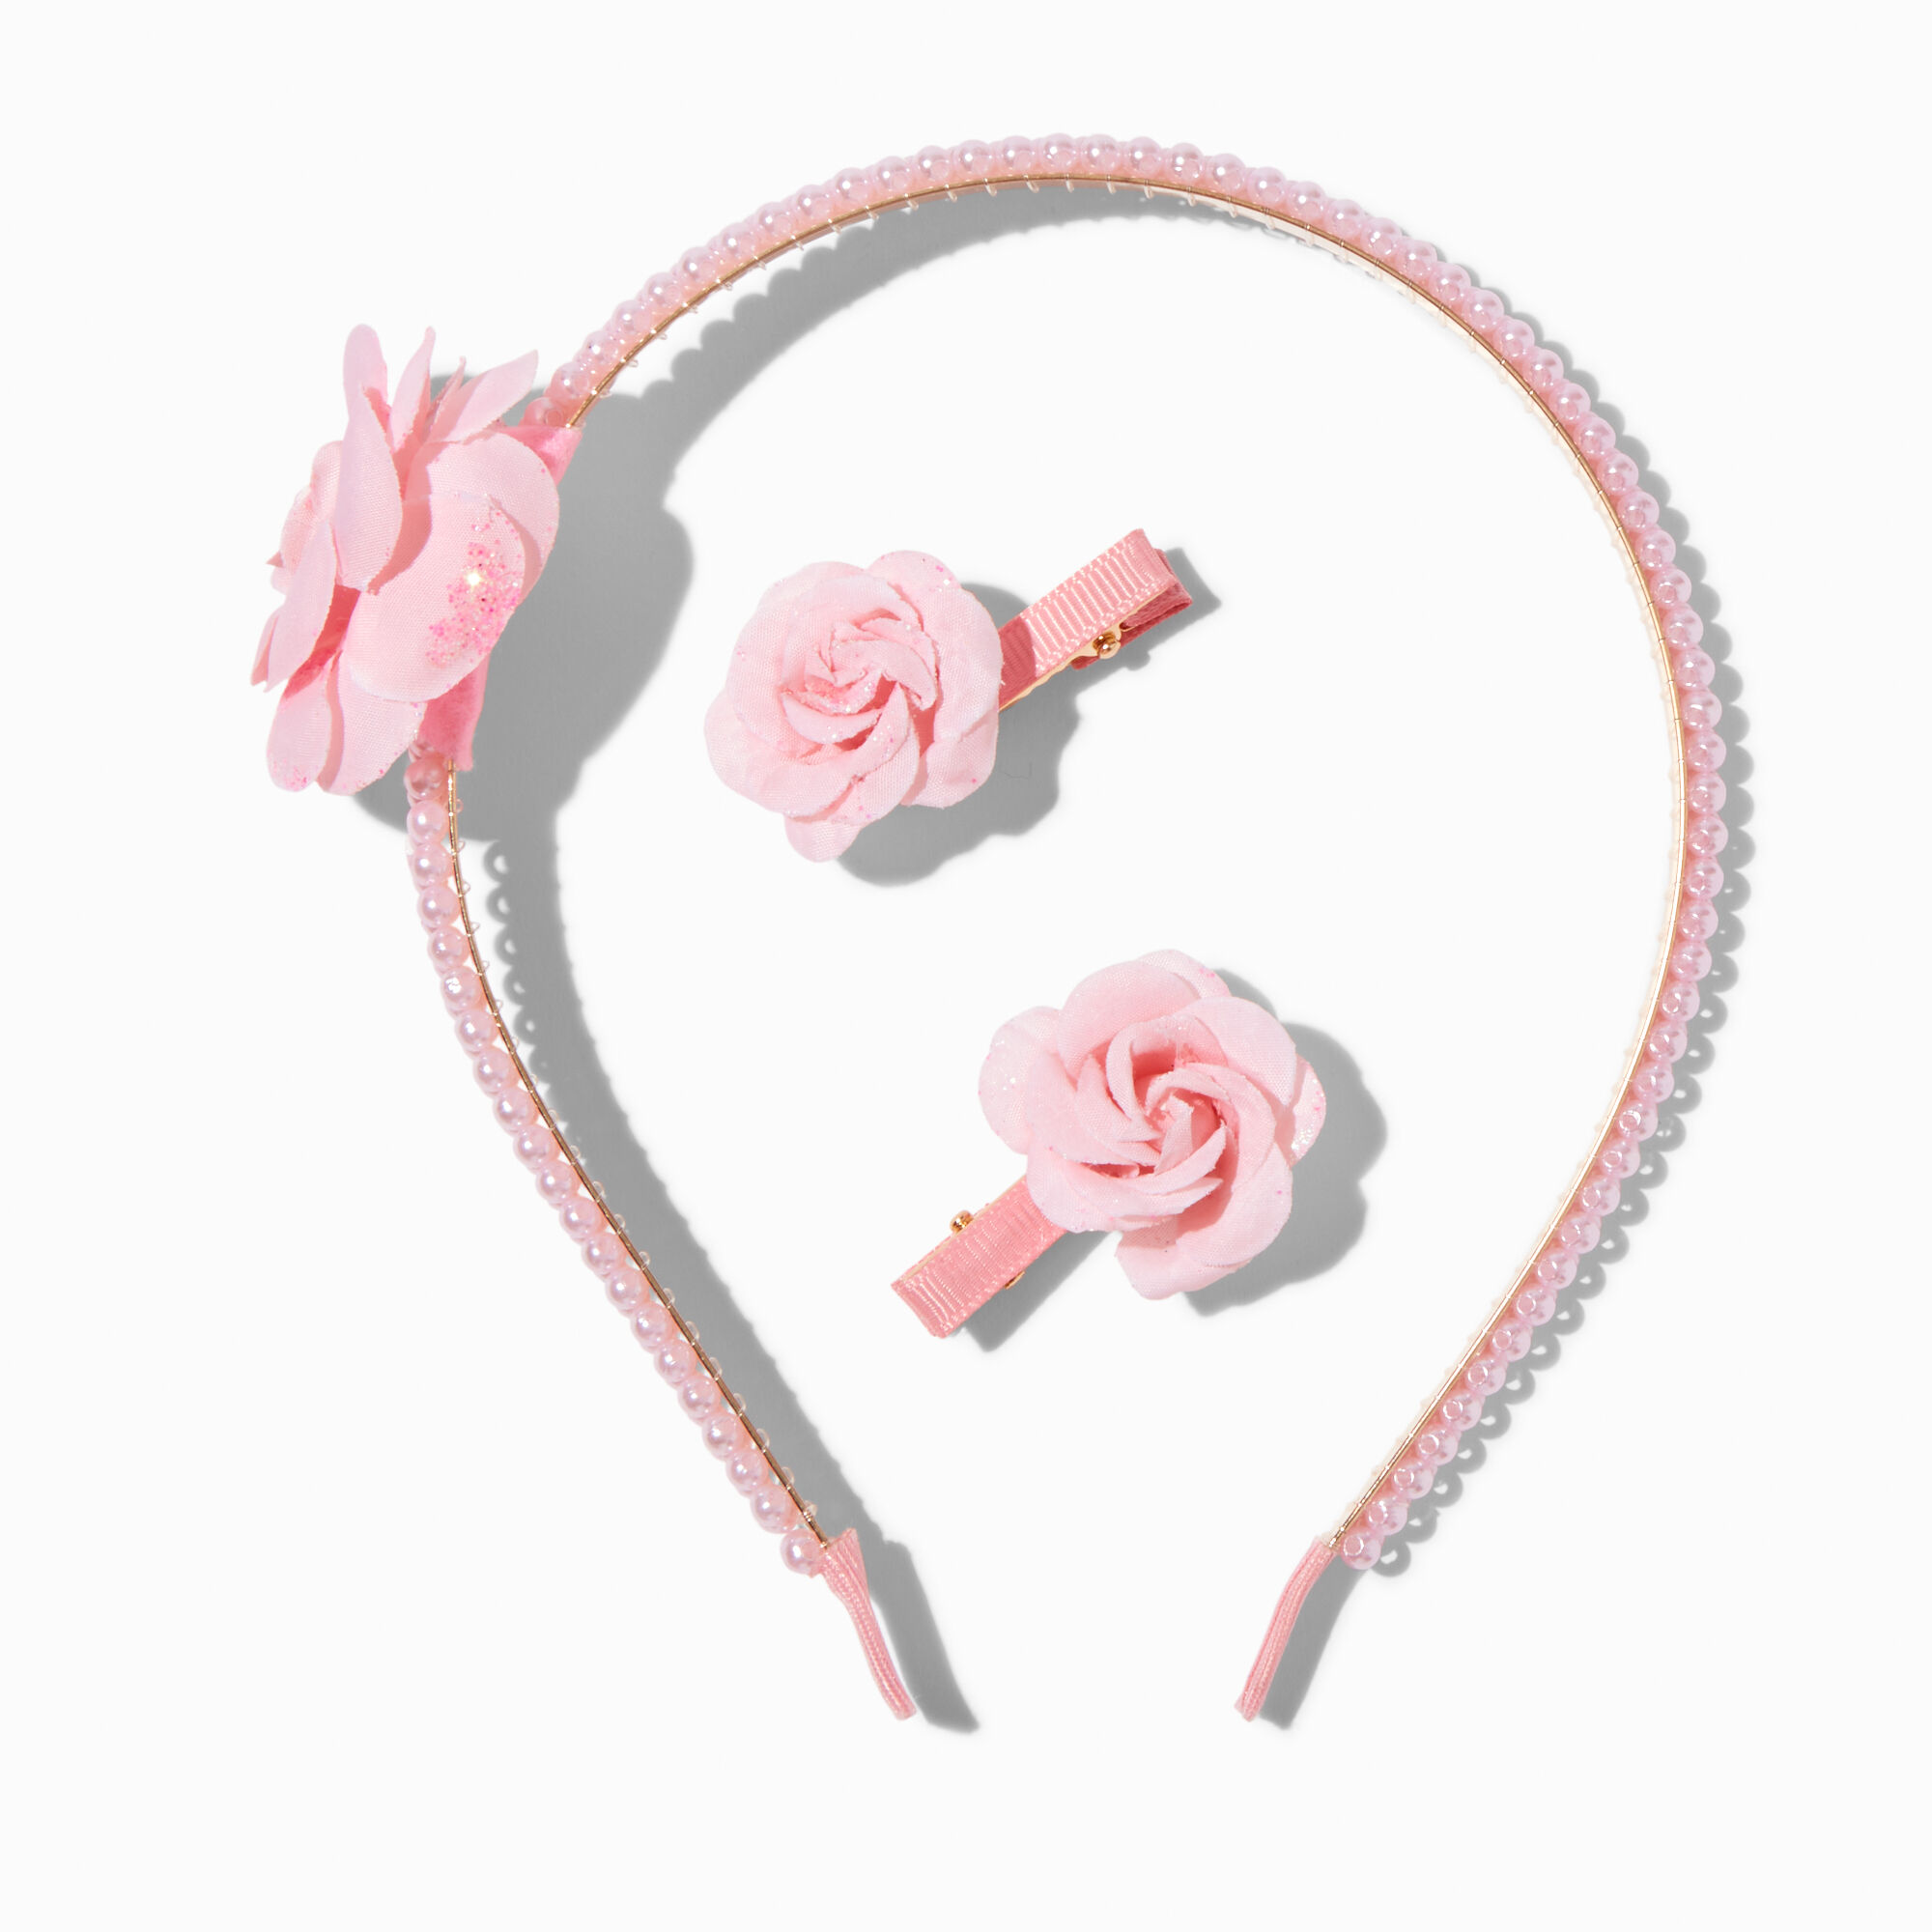 View Claires Club Flower Headband Snap Hair Clip Set 3 Pack Pink information